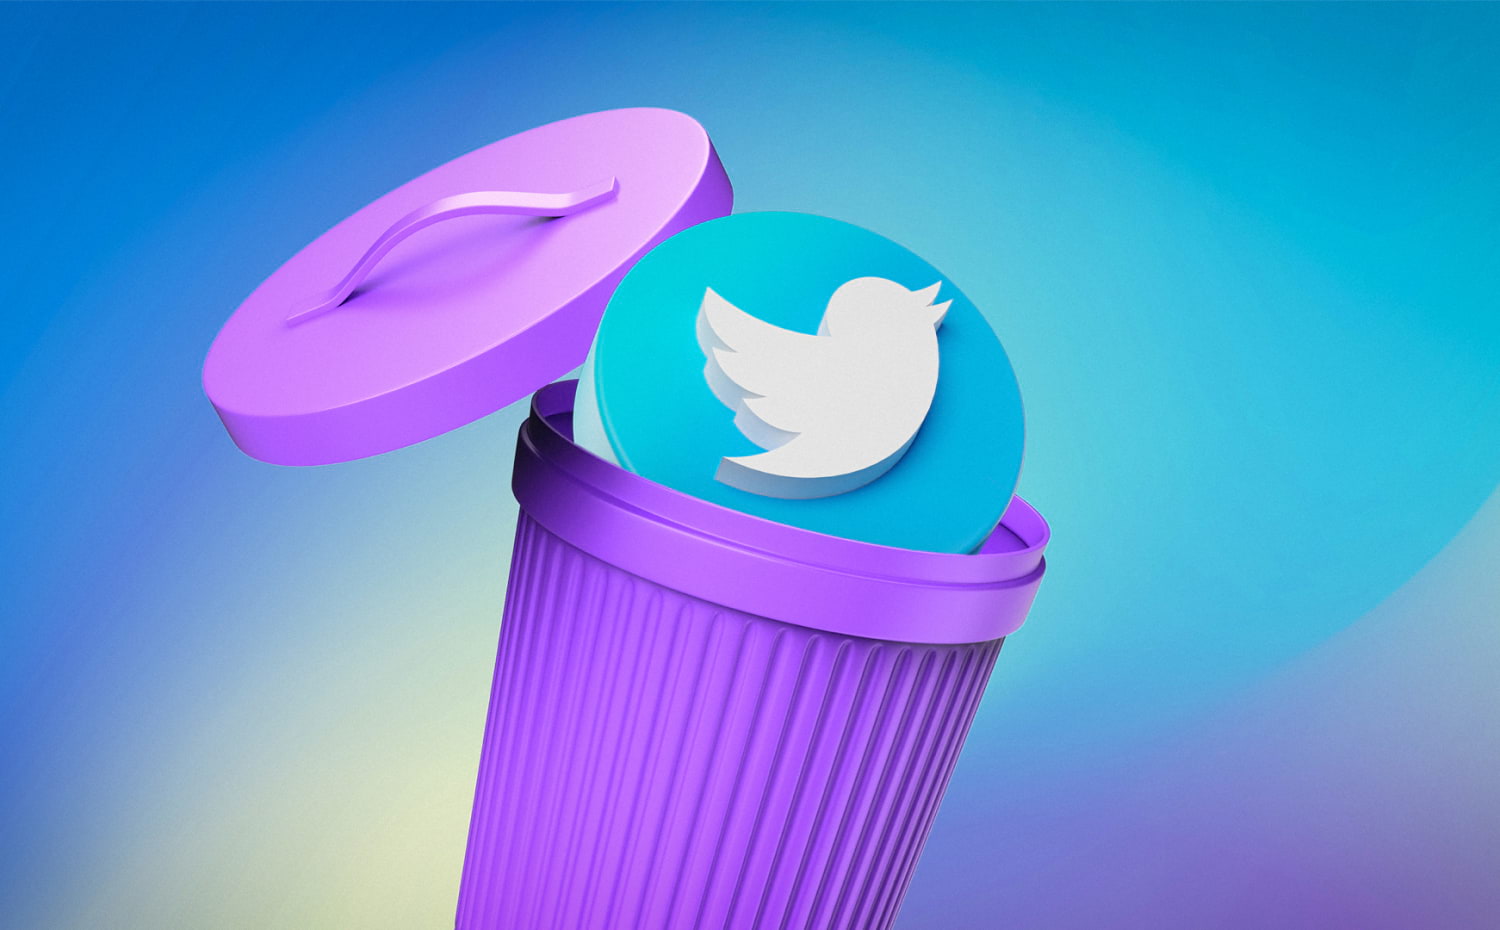 The Twitter icon sits in a purple garbage can with the lid open.